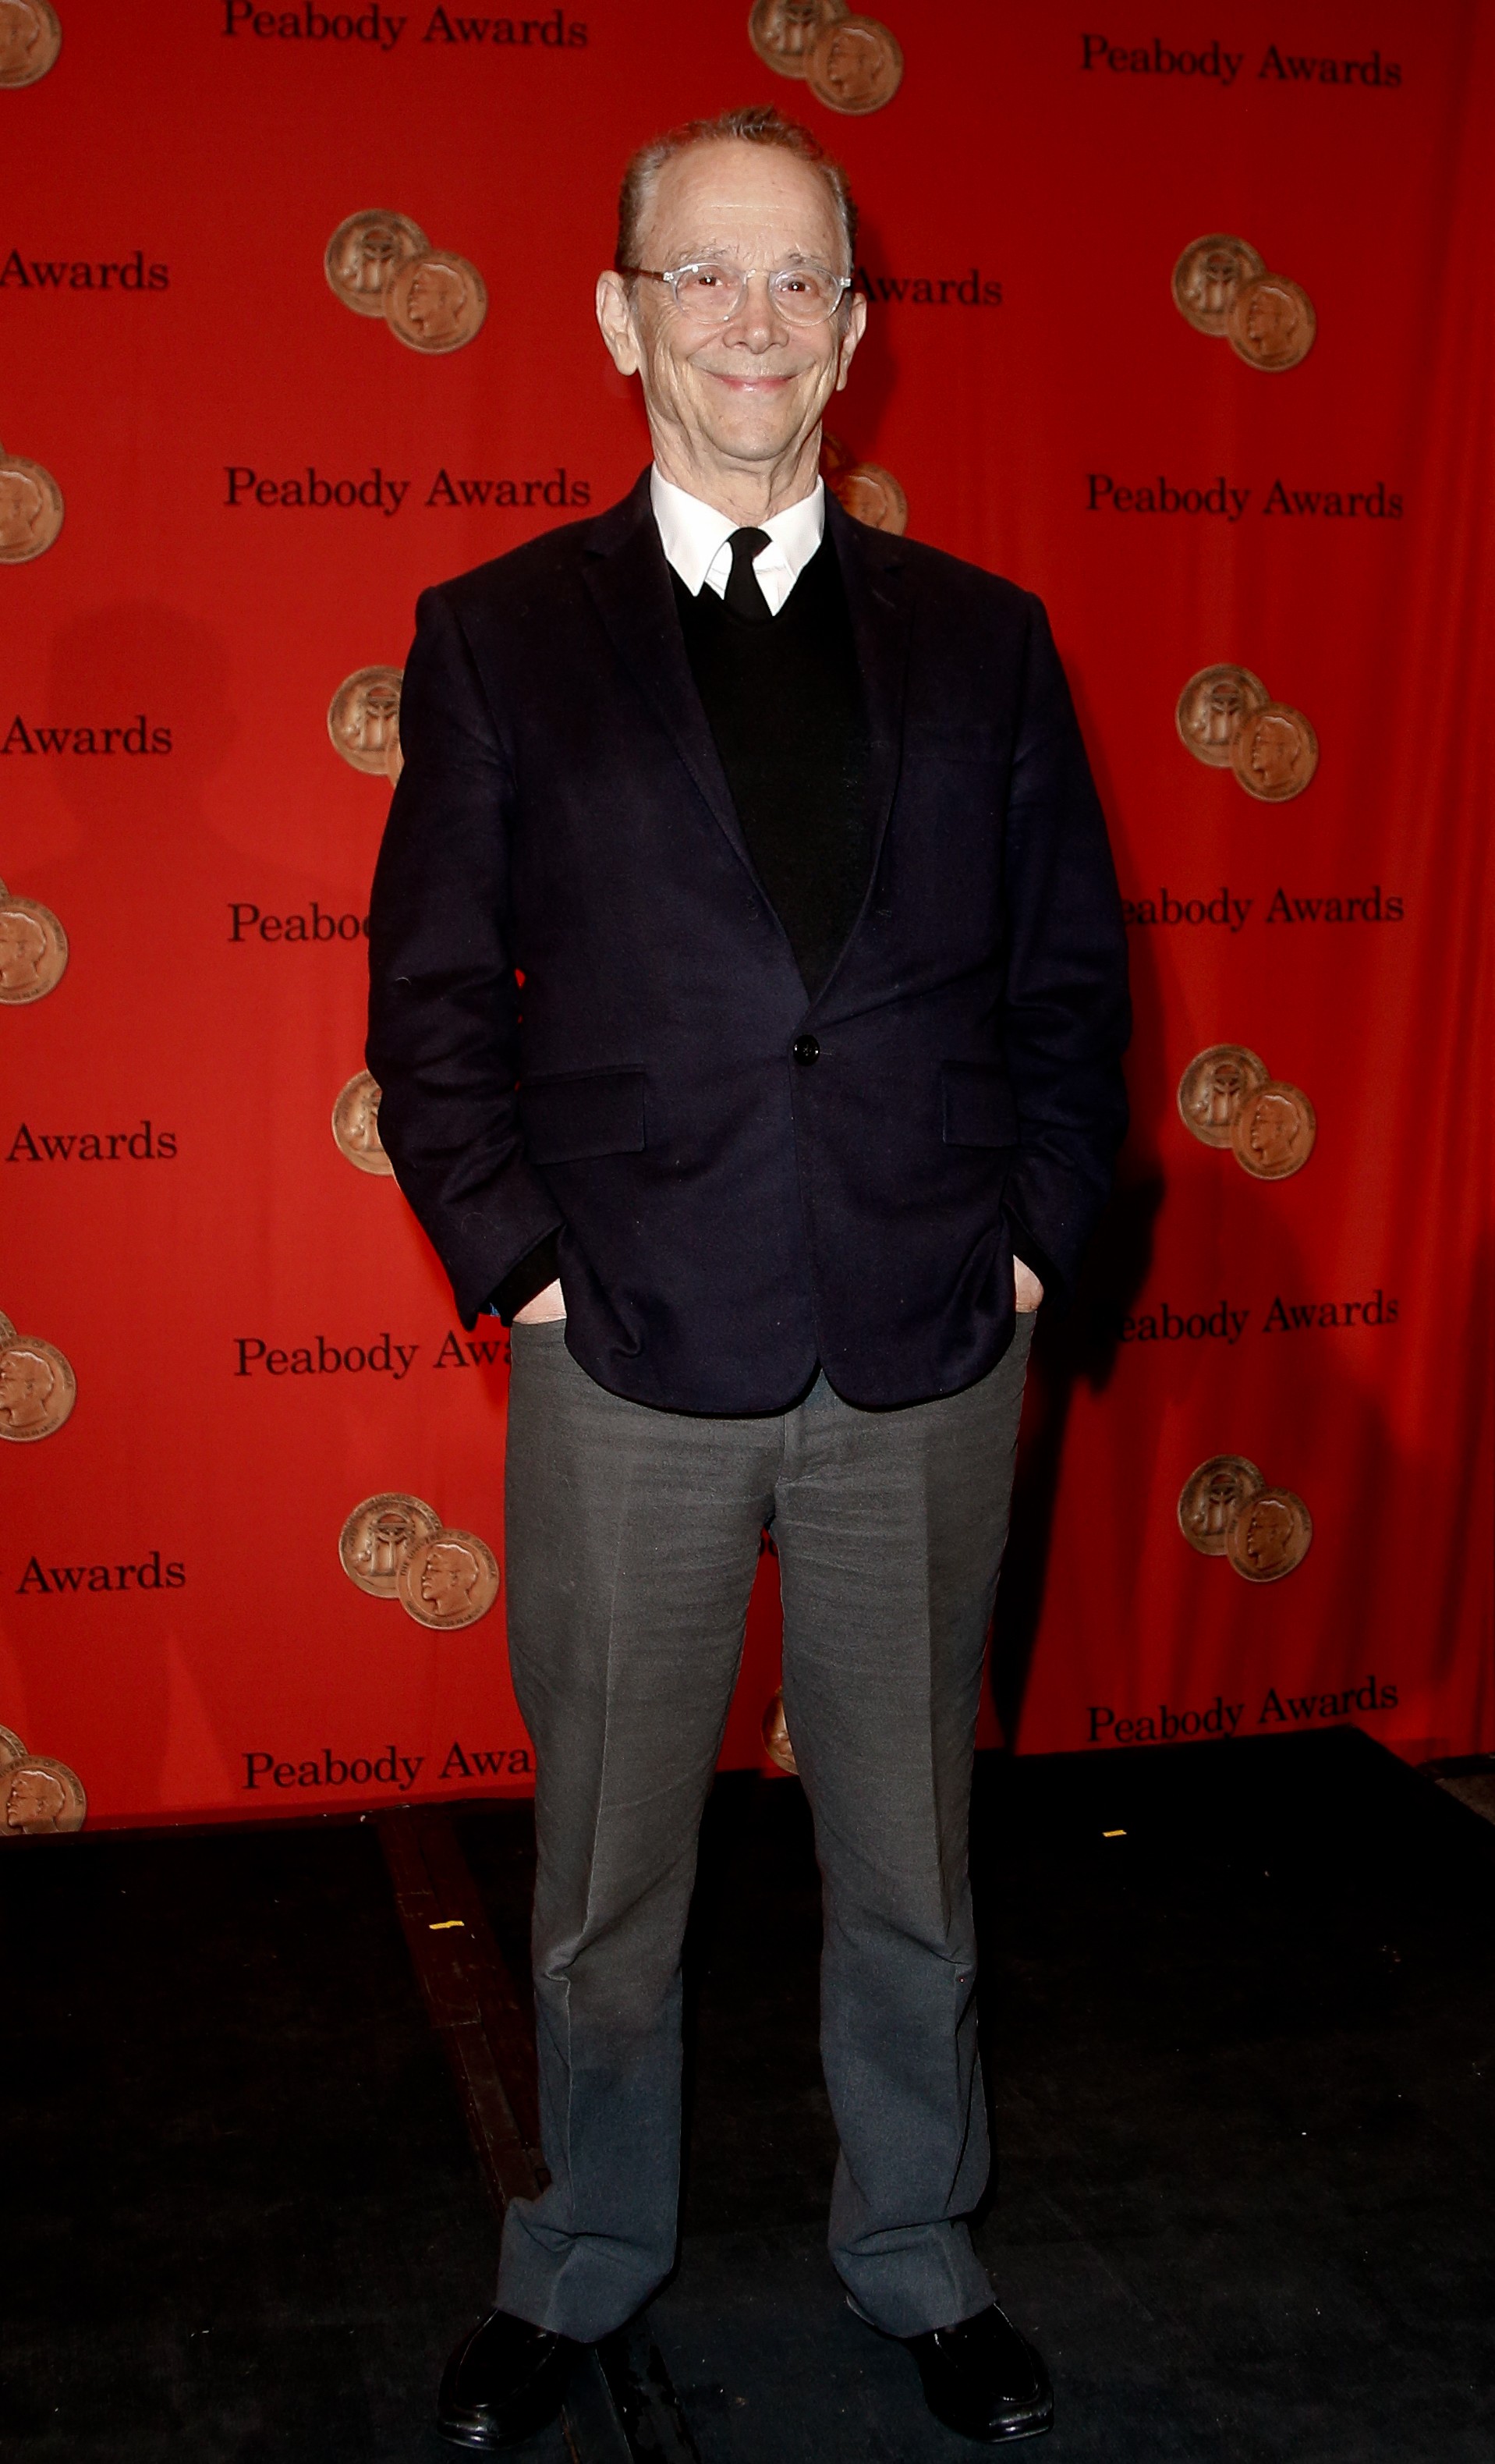 Actor Joel Grey attends the 73rd Annual George Foster Peabody Awards at the Waldorf Astoria on May 19, 2014 in New York.